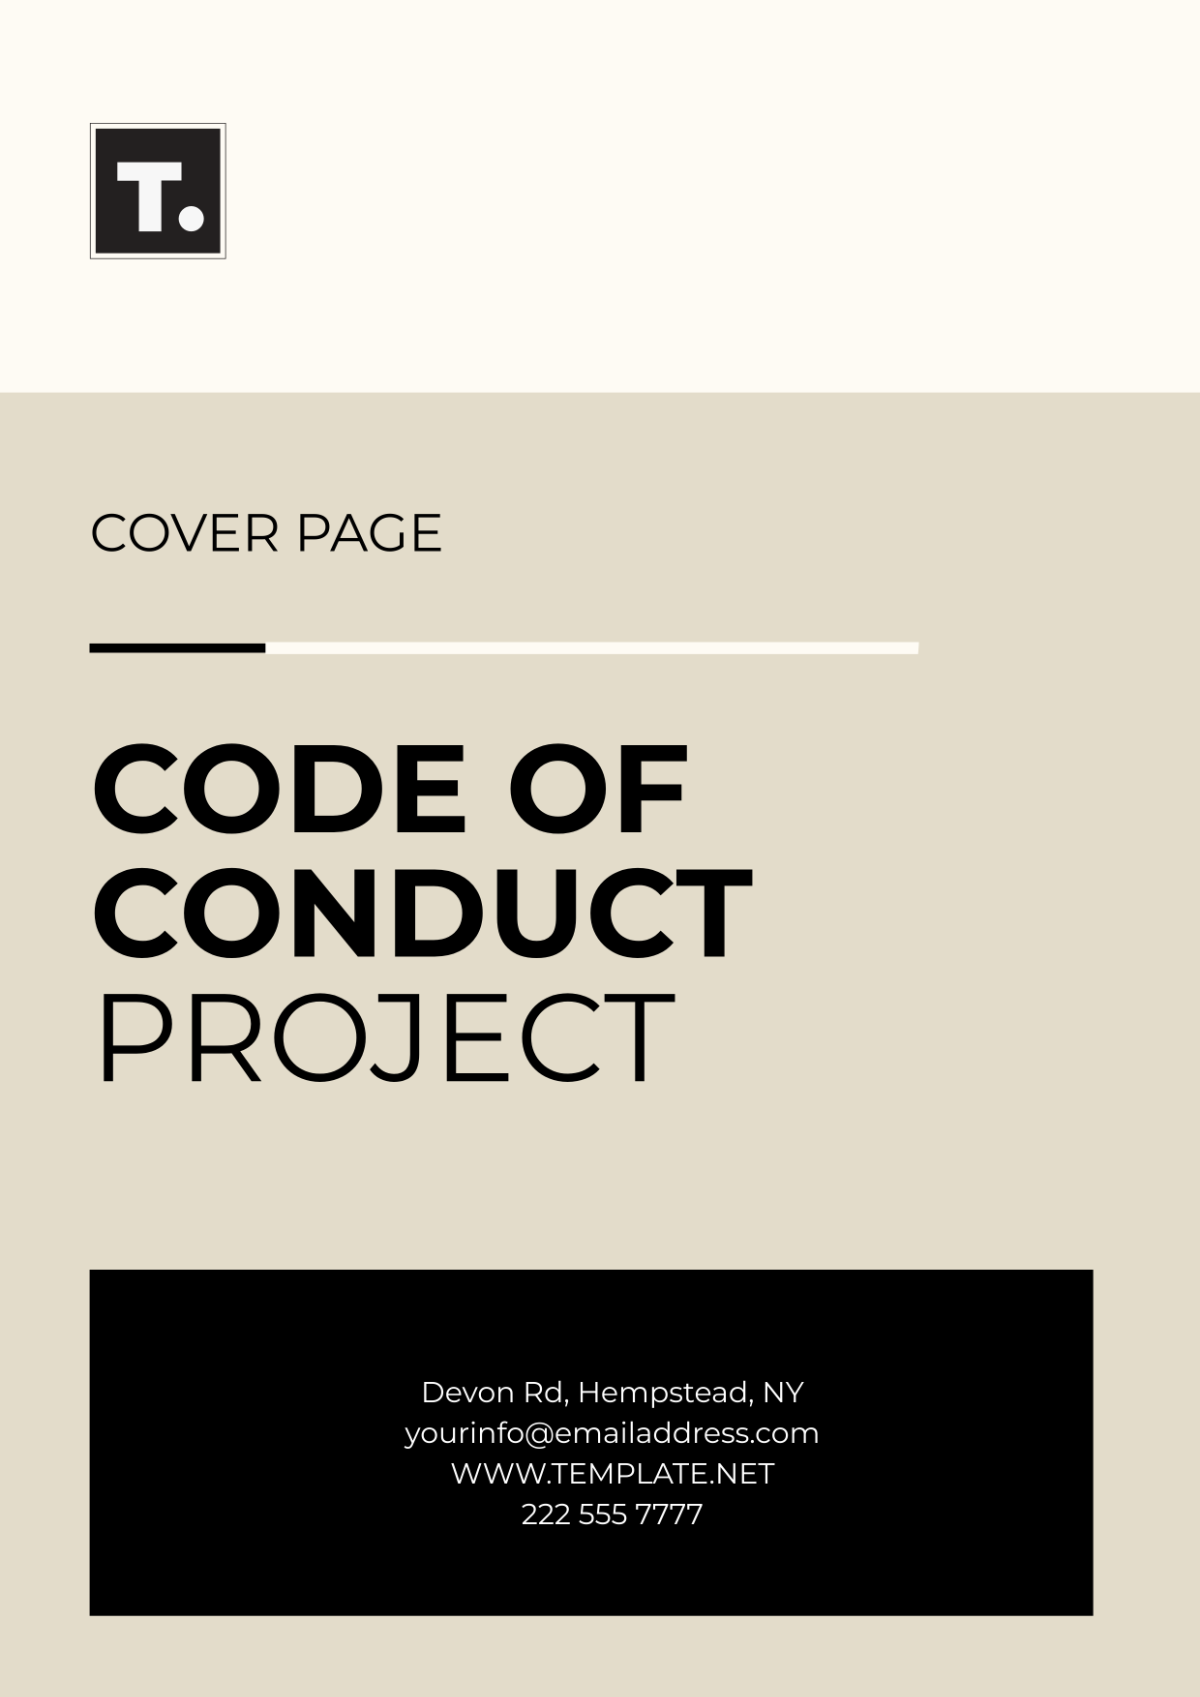 Code of Conduct Project Cover Page